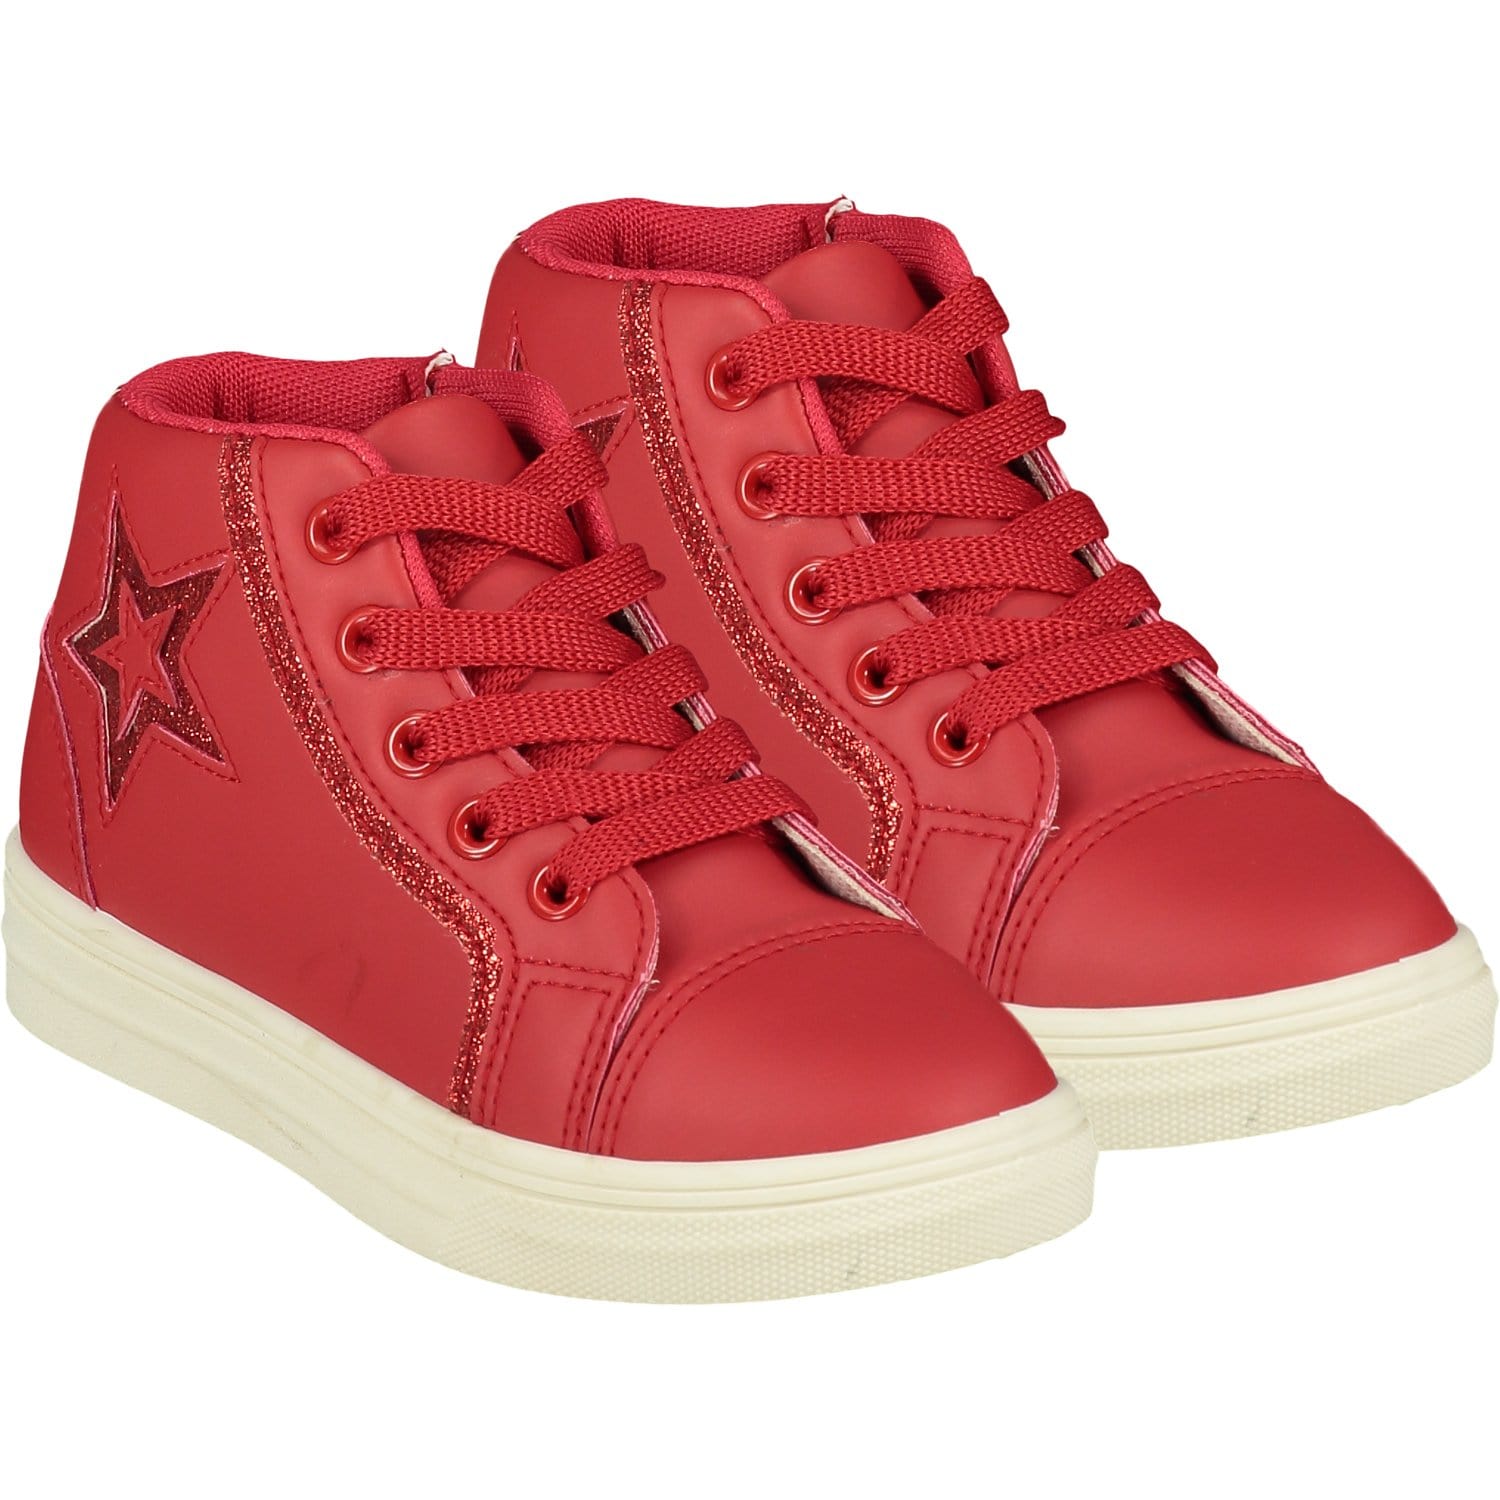 A DEE - Star High Top Lace Trainer - Red